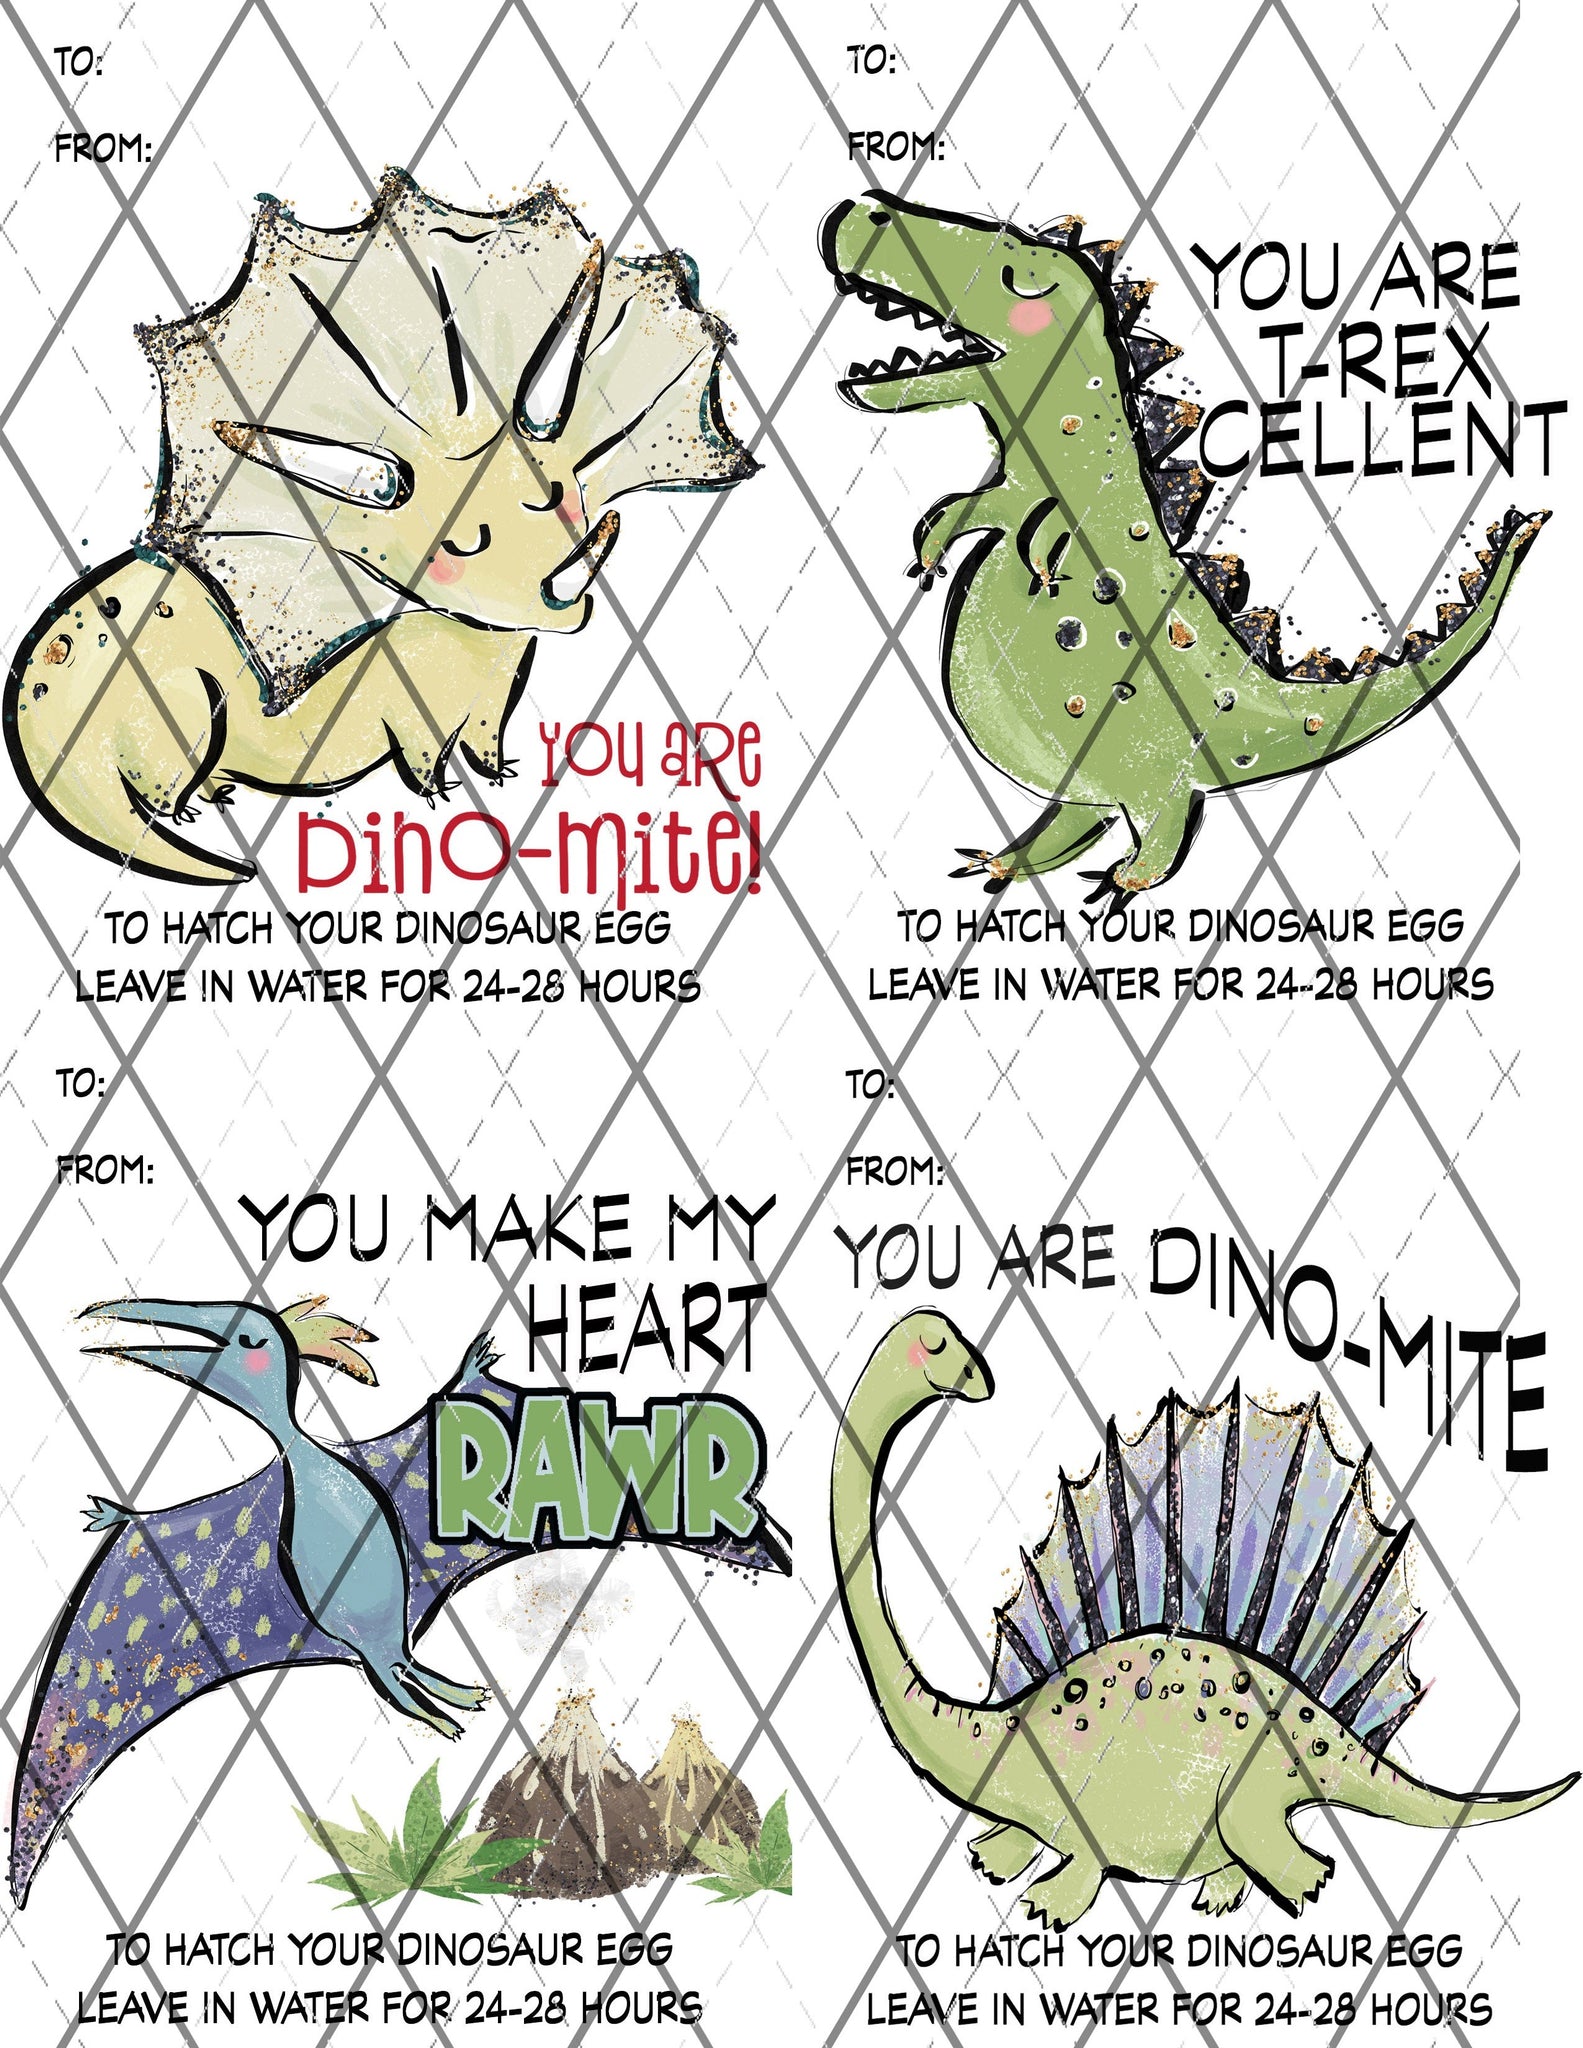 Dinosaur Valentine printed cards with bags and eggs - sold individually